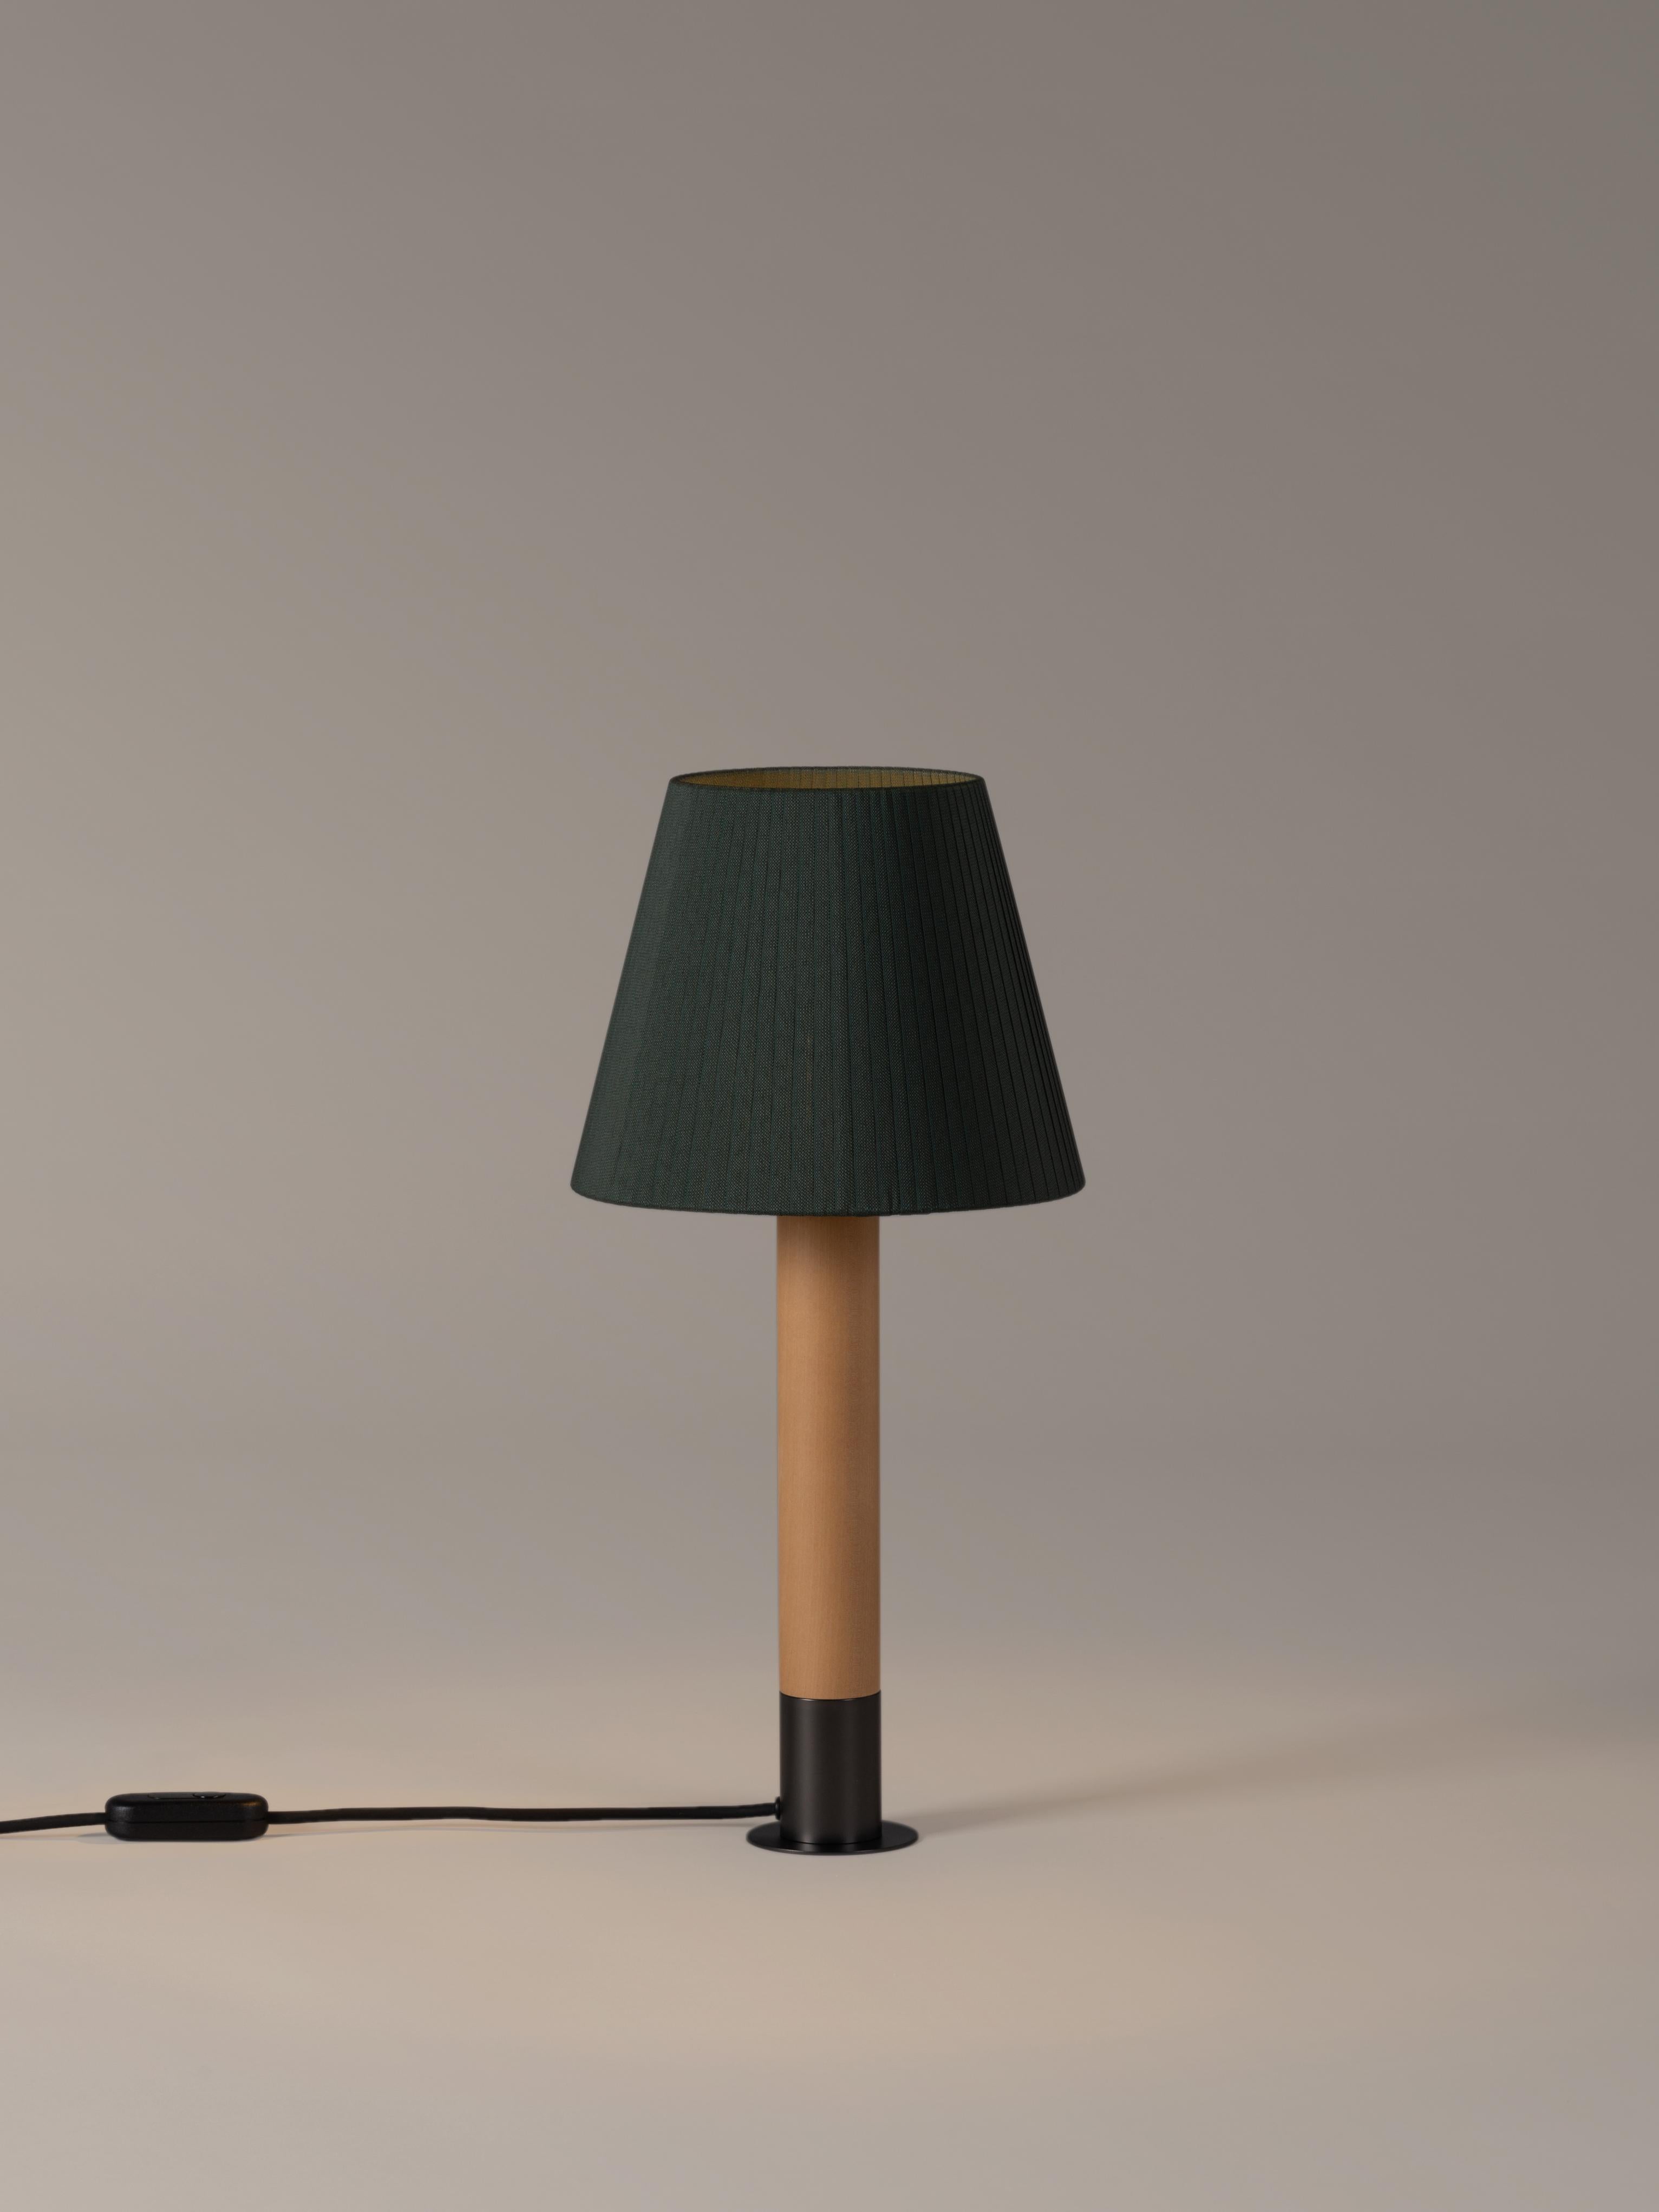 Bronze and Green Básica M1 table lamp by Santiago Roqueta, Santa & Cole
Dimensions: D 25 x H 52 cm
Materials: Bronze, birch wood, ribbon.
Available in other shade colors and with or without the stabilizing disc.
Available in nickel or bronze.

The